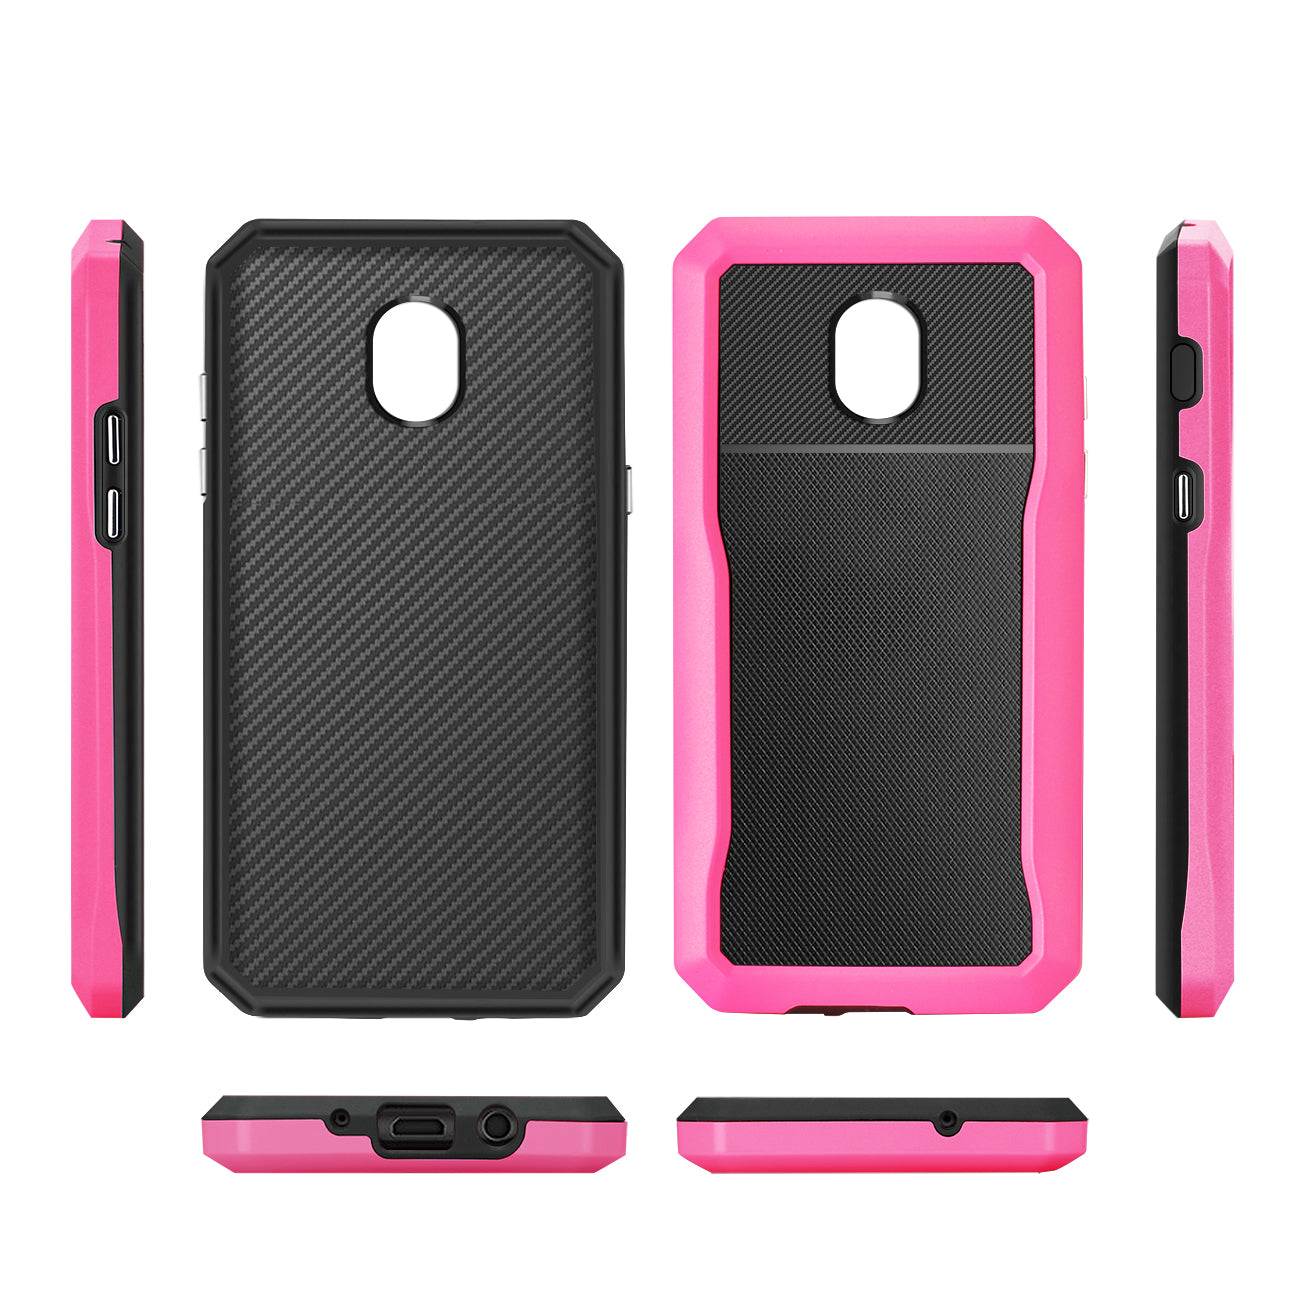 Reiko SAMSUNG GALAXY J7 (2018) Full Coverage Shockproof Case In Pink